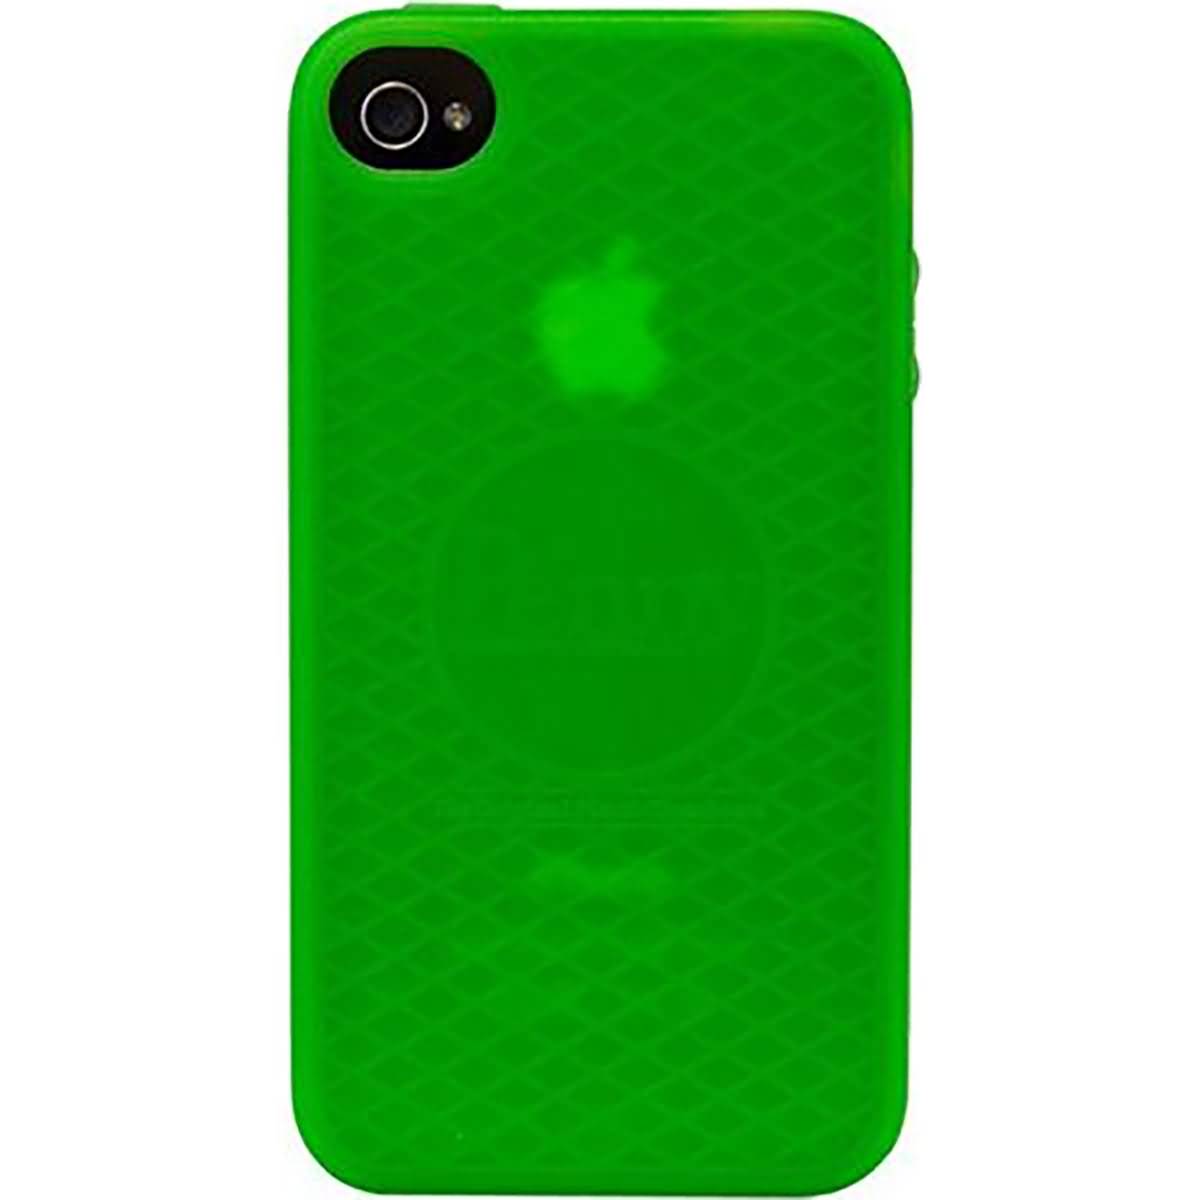 Penny Iphone 5/5s Case Phone Accessories-13322606